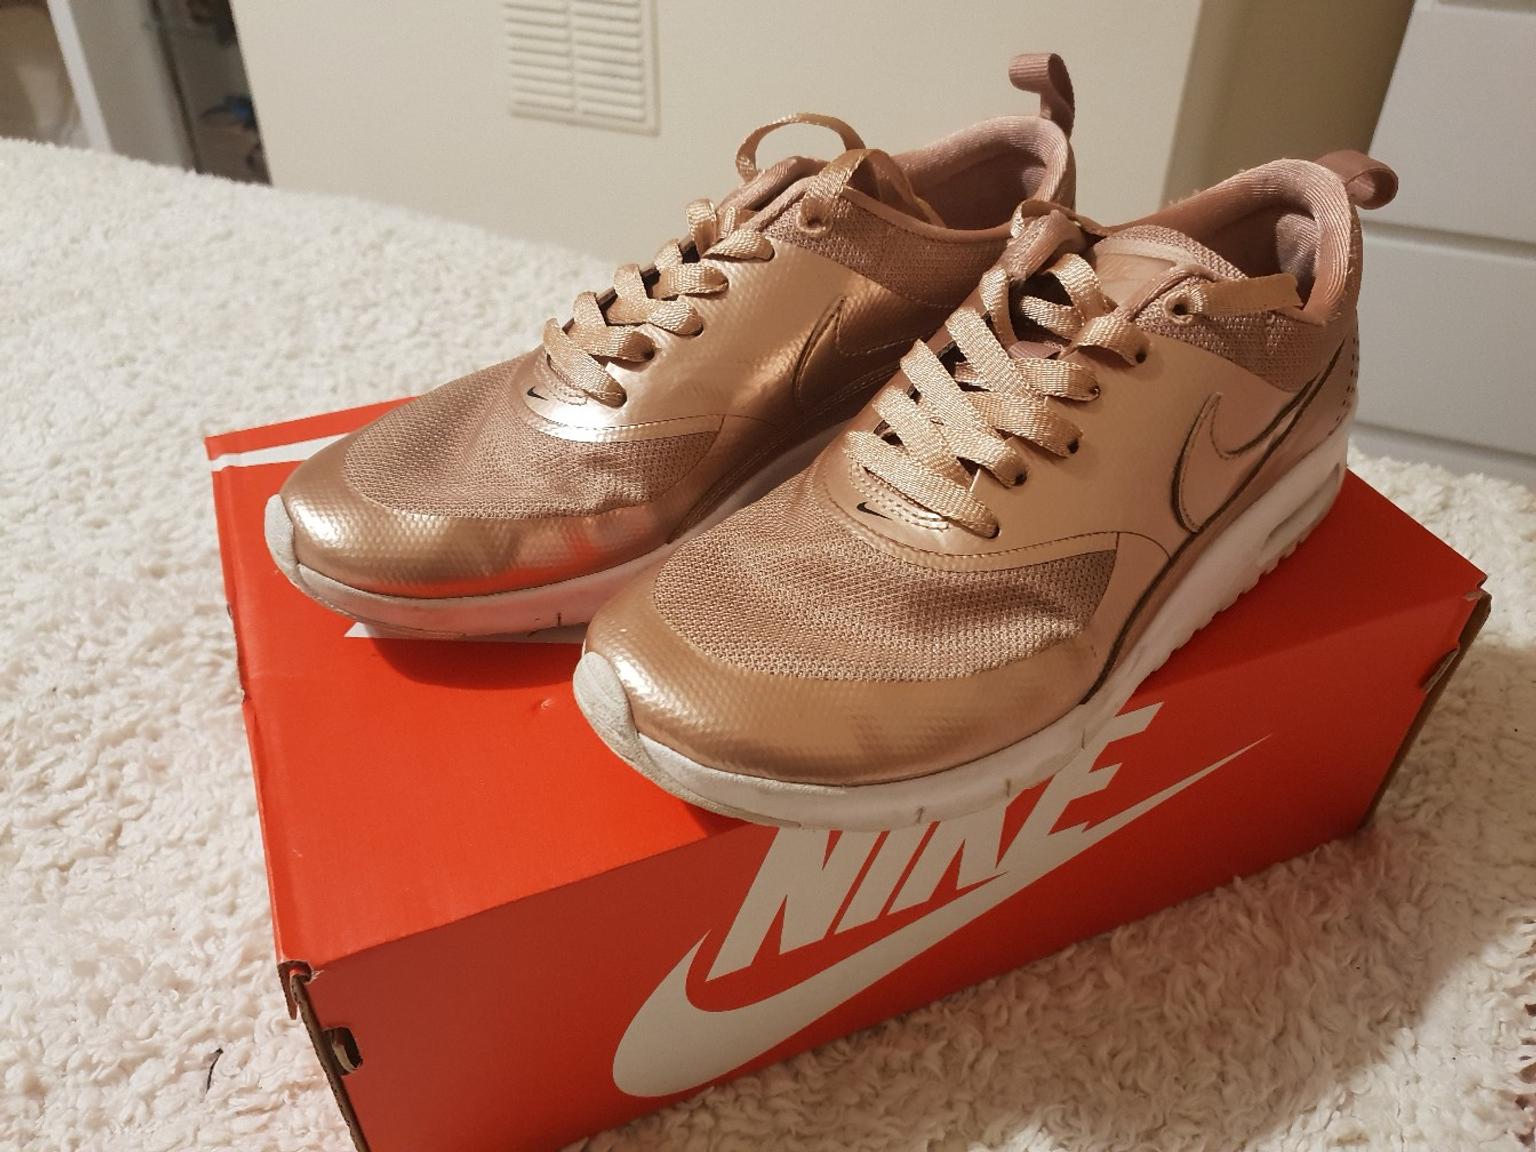 rose gold nike trainers